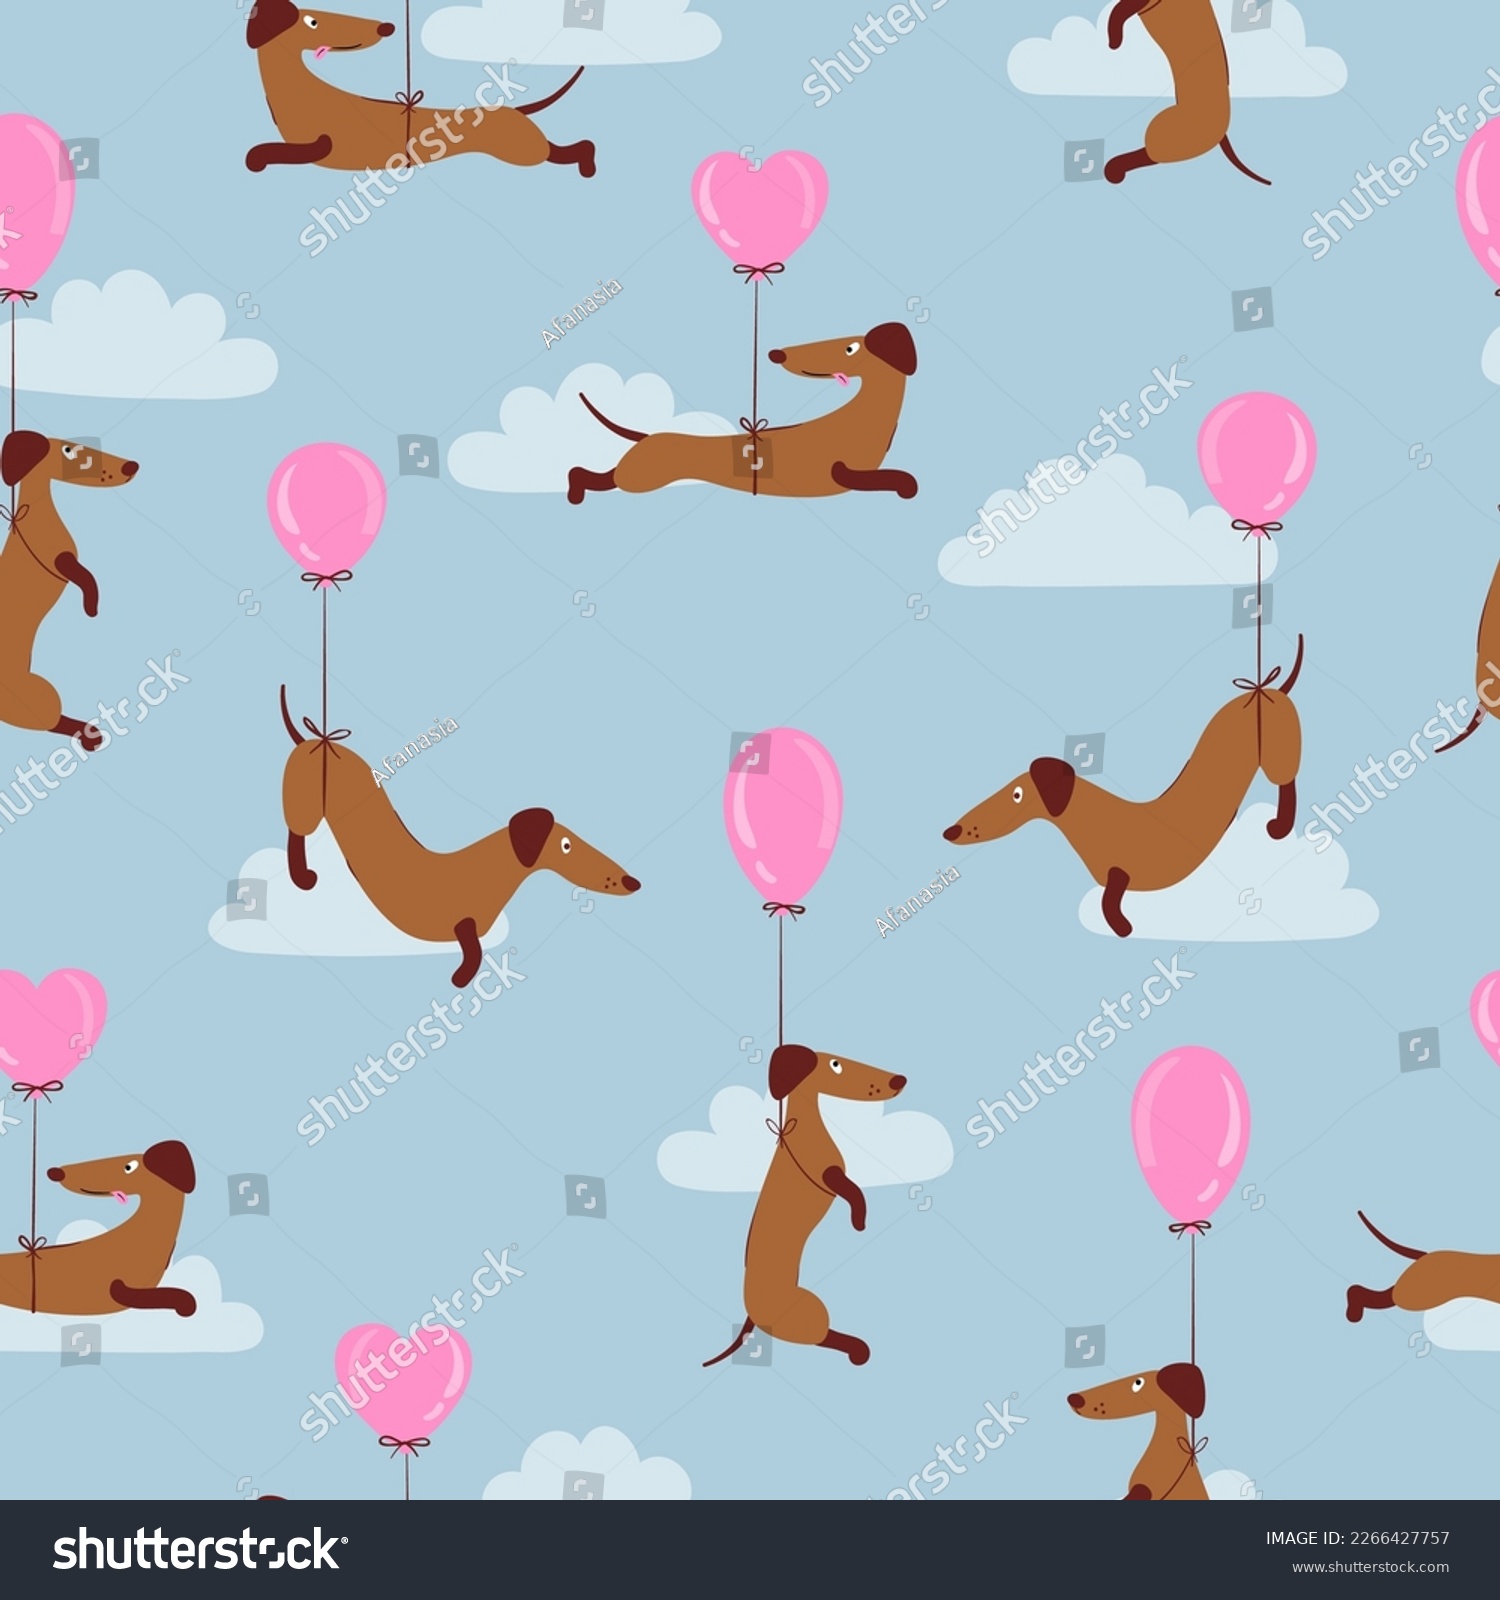 SVG of Seamless pattern with cute dachshunds and balloons. Vector cartoon dog illustration svg